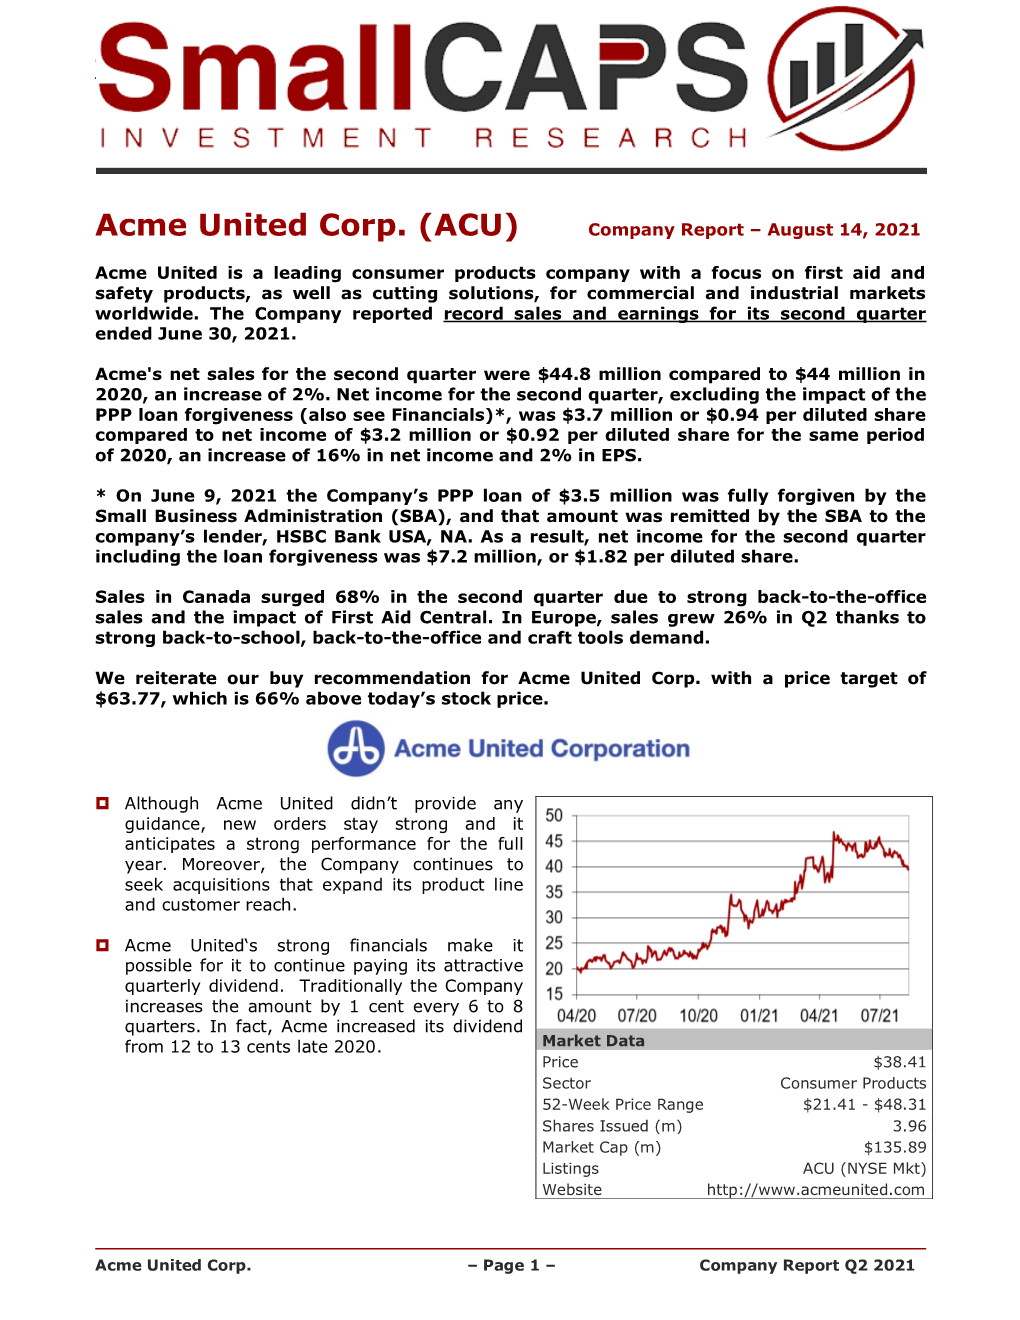 Acme United Corp. (ACU) Company Report – August 14, 2021